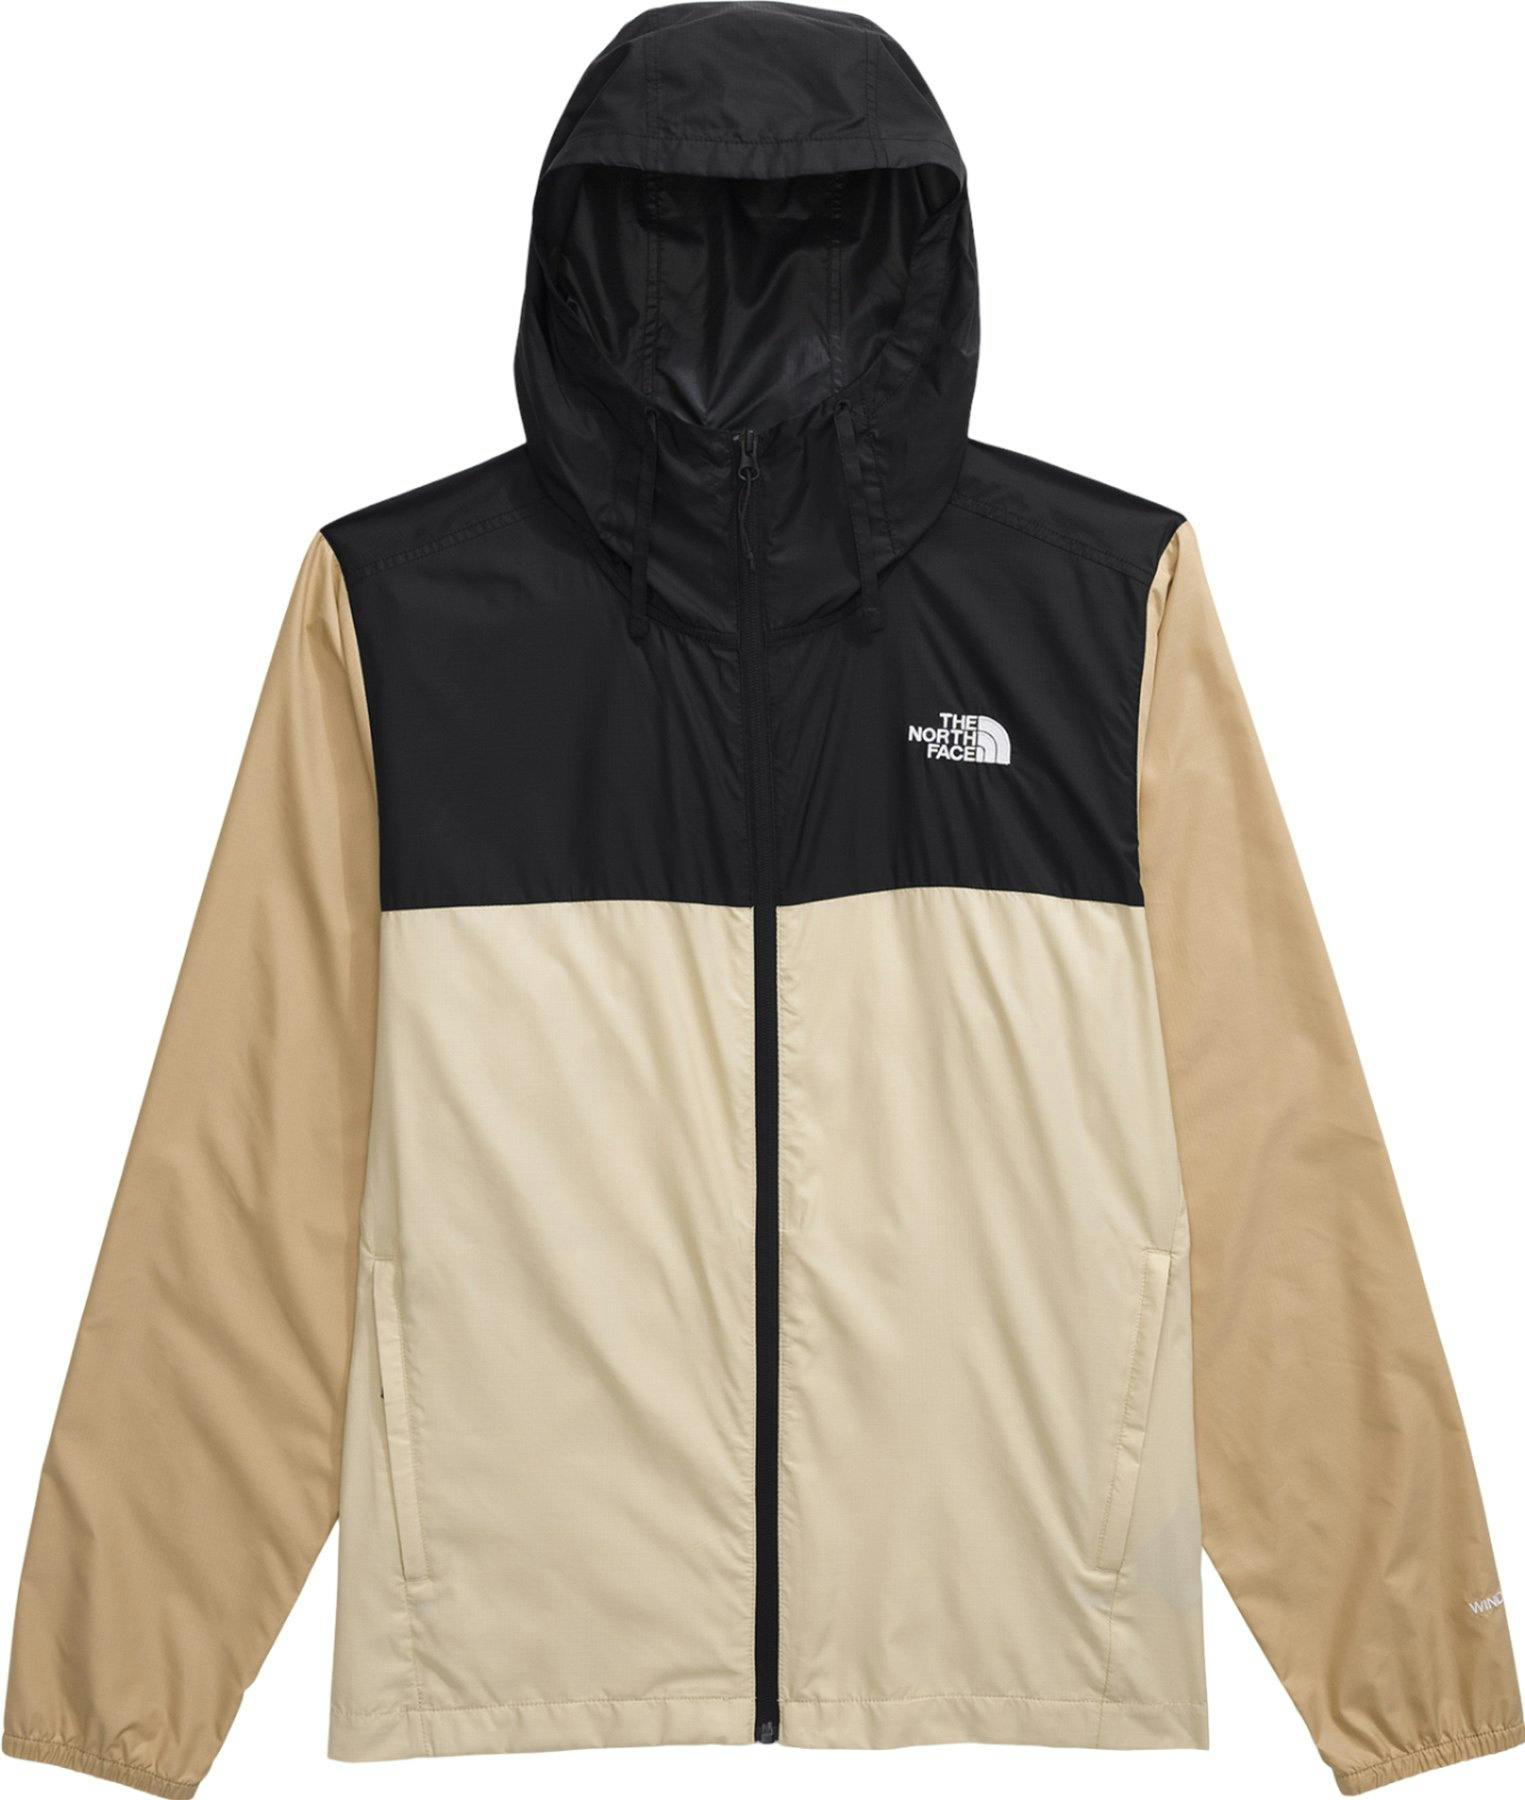 Product image for Cyclone 3 Jacket - Men's